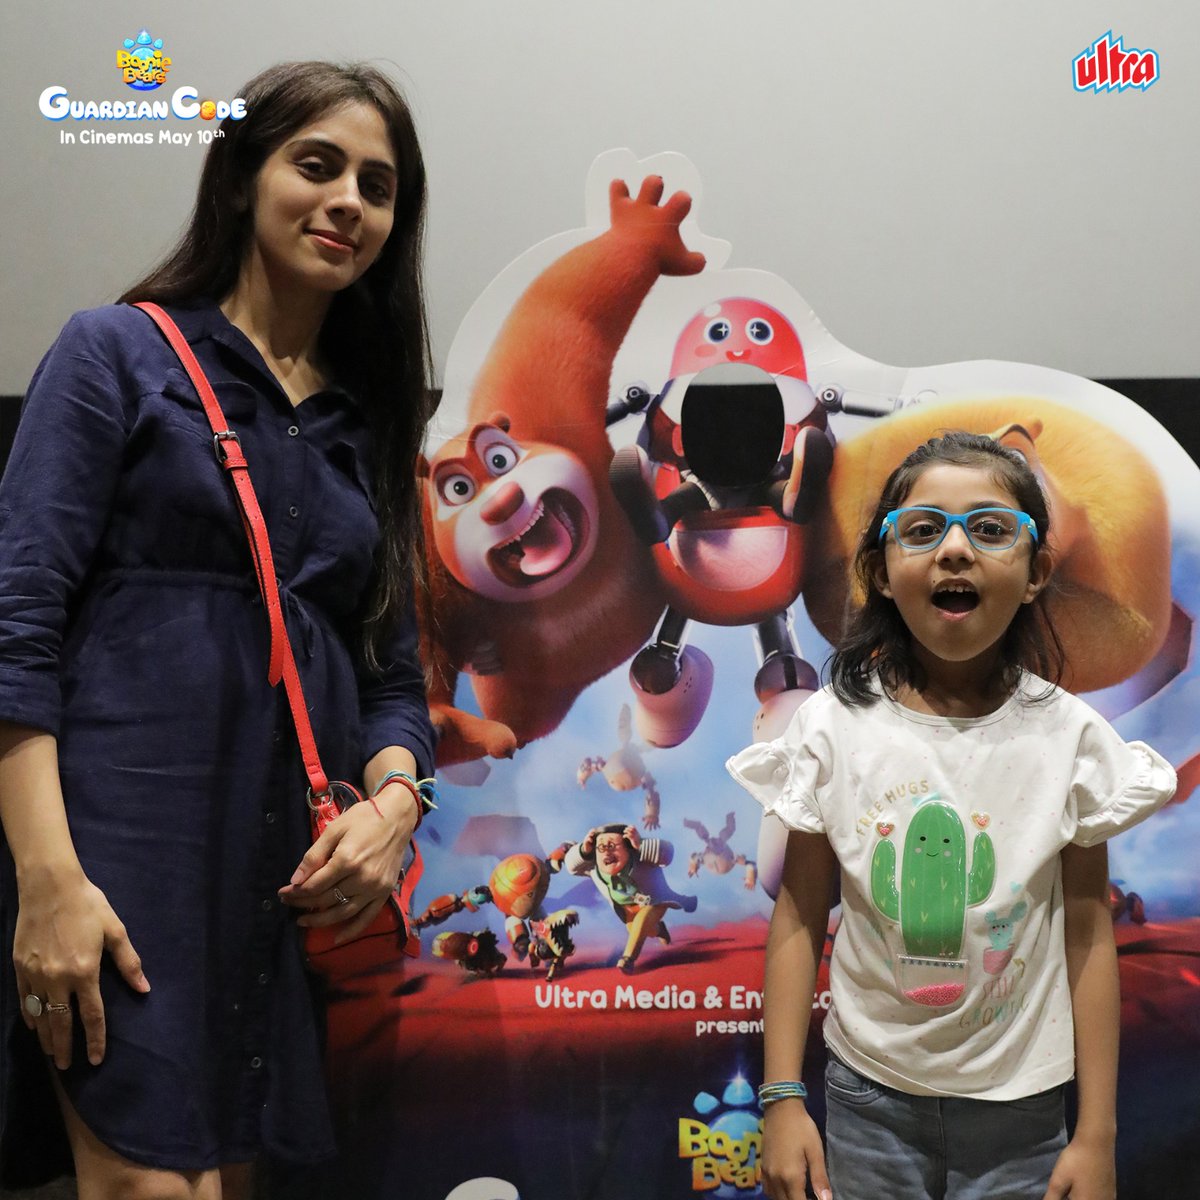 Our much-awaited #BoonieBears animation movie is now showing in theatres across #India! Get ready for adventure, laughter, and a whole lot of fun!
#InCinemasNow, a #MothersDay special, Available in English and Hindi.

Grab your tickets now : bit.ly/booniebearsgua…